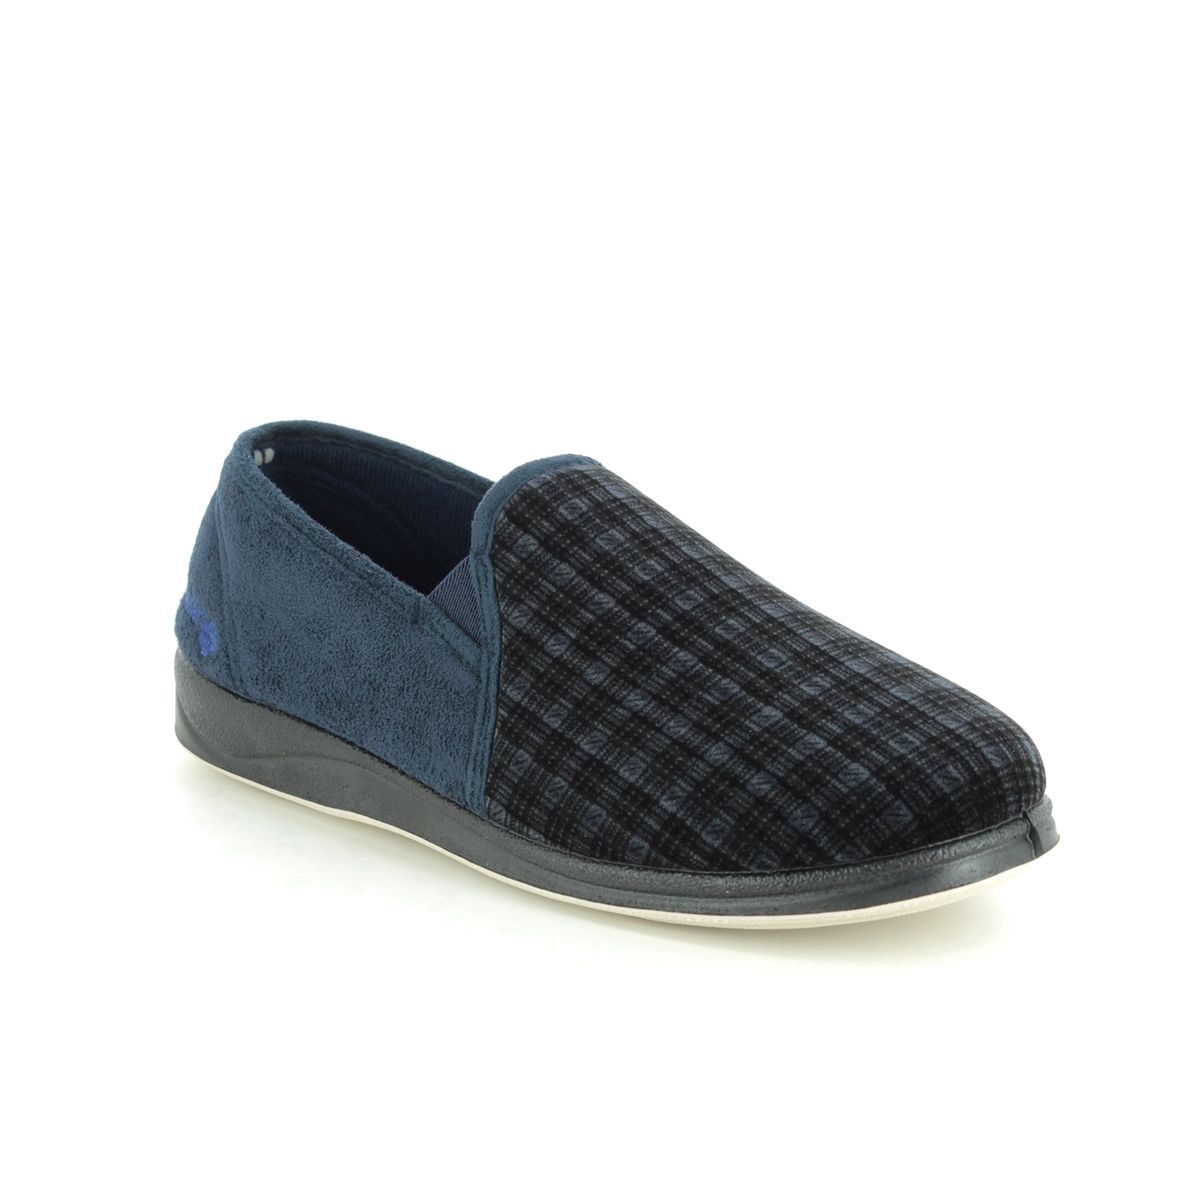 Padders Albert G Fit Navy Mens slippers 408S-96 in a Tartan Textile in Size 9